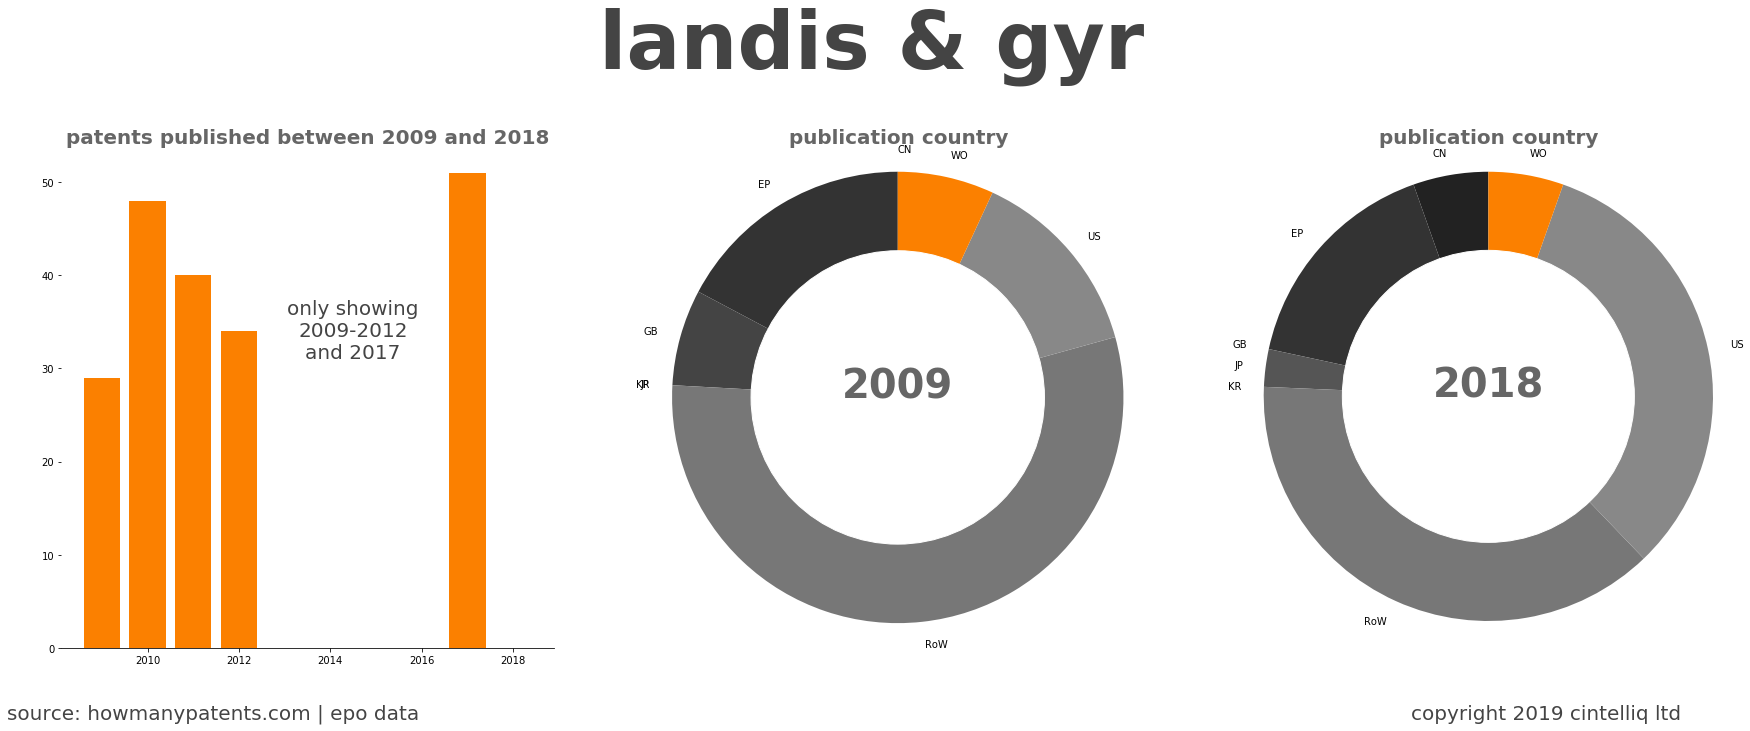 summary of patents for Landis & Gyr